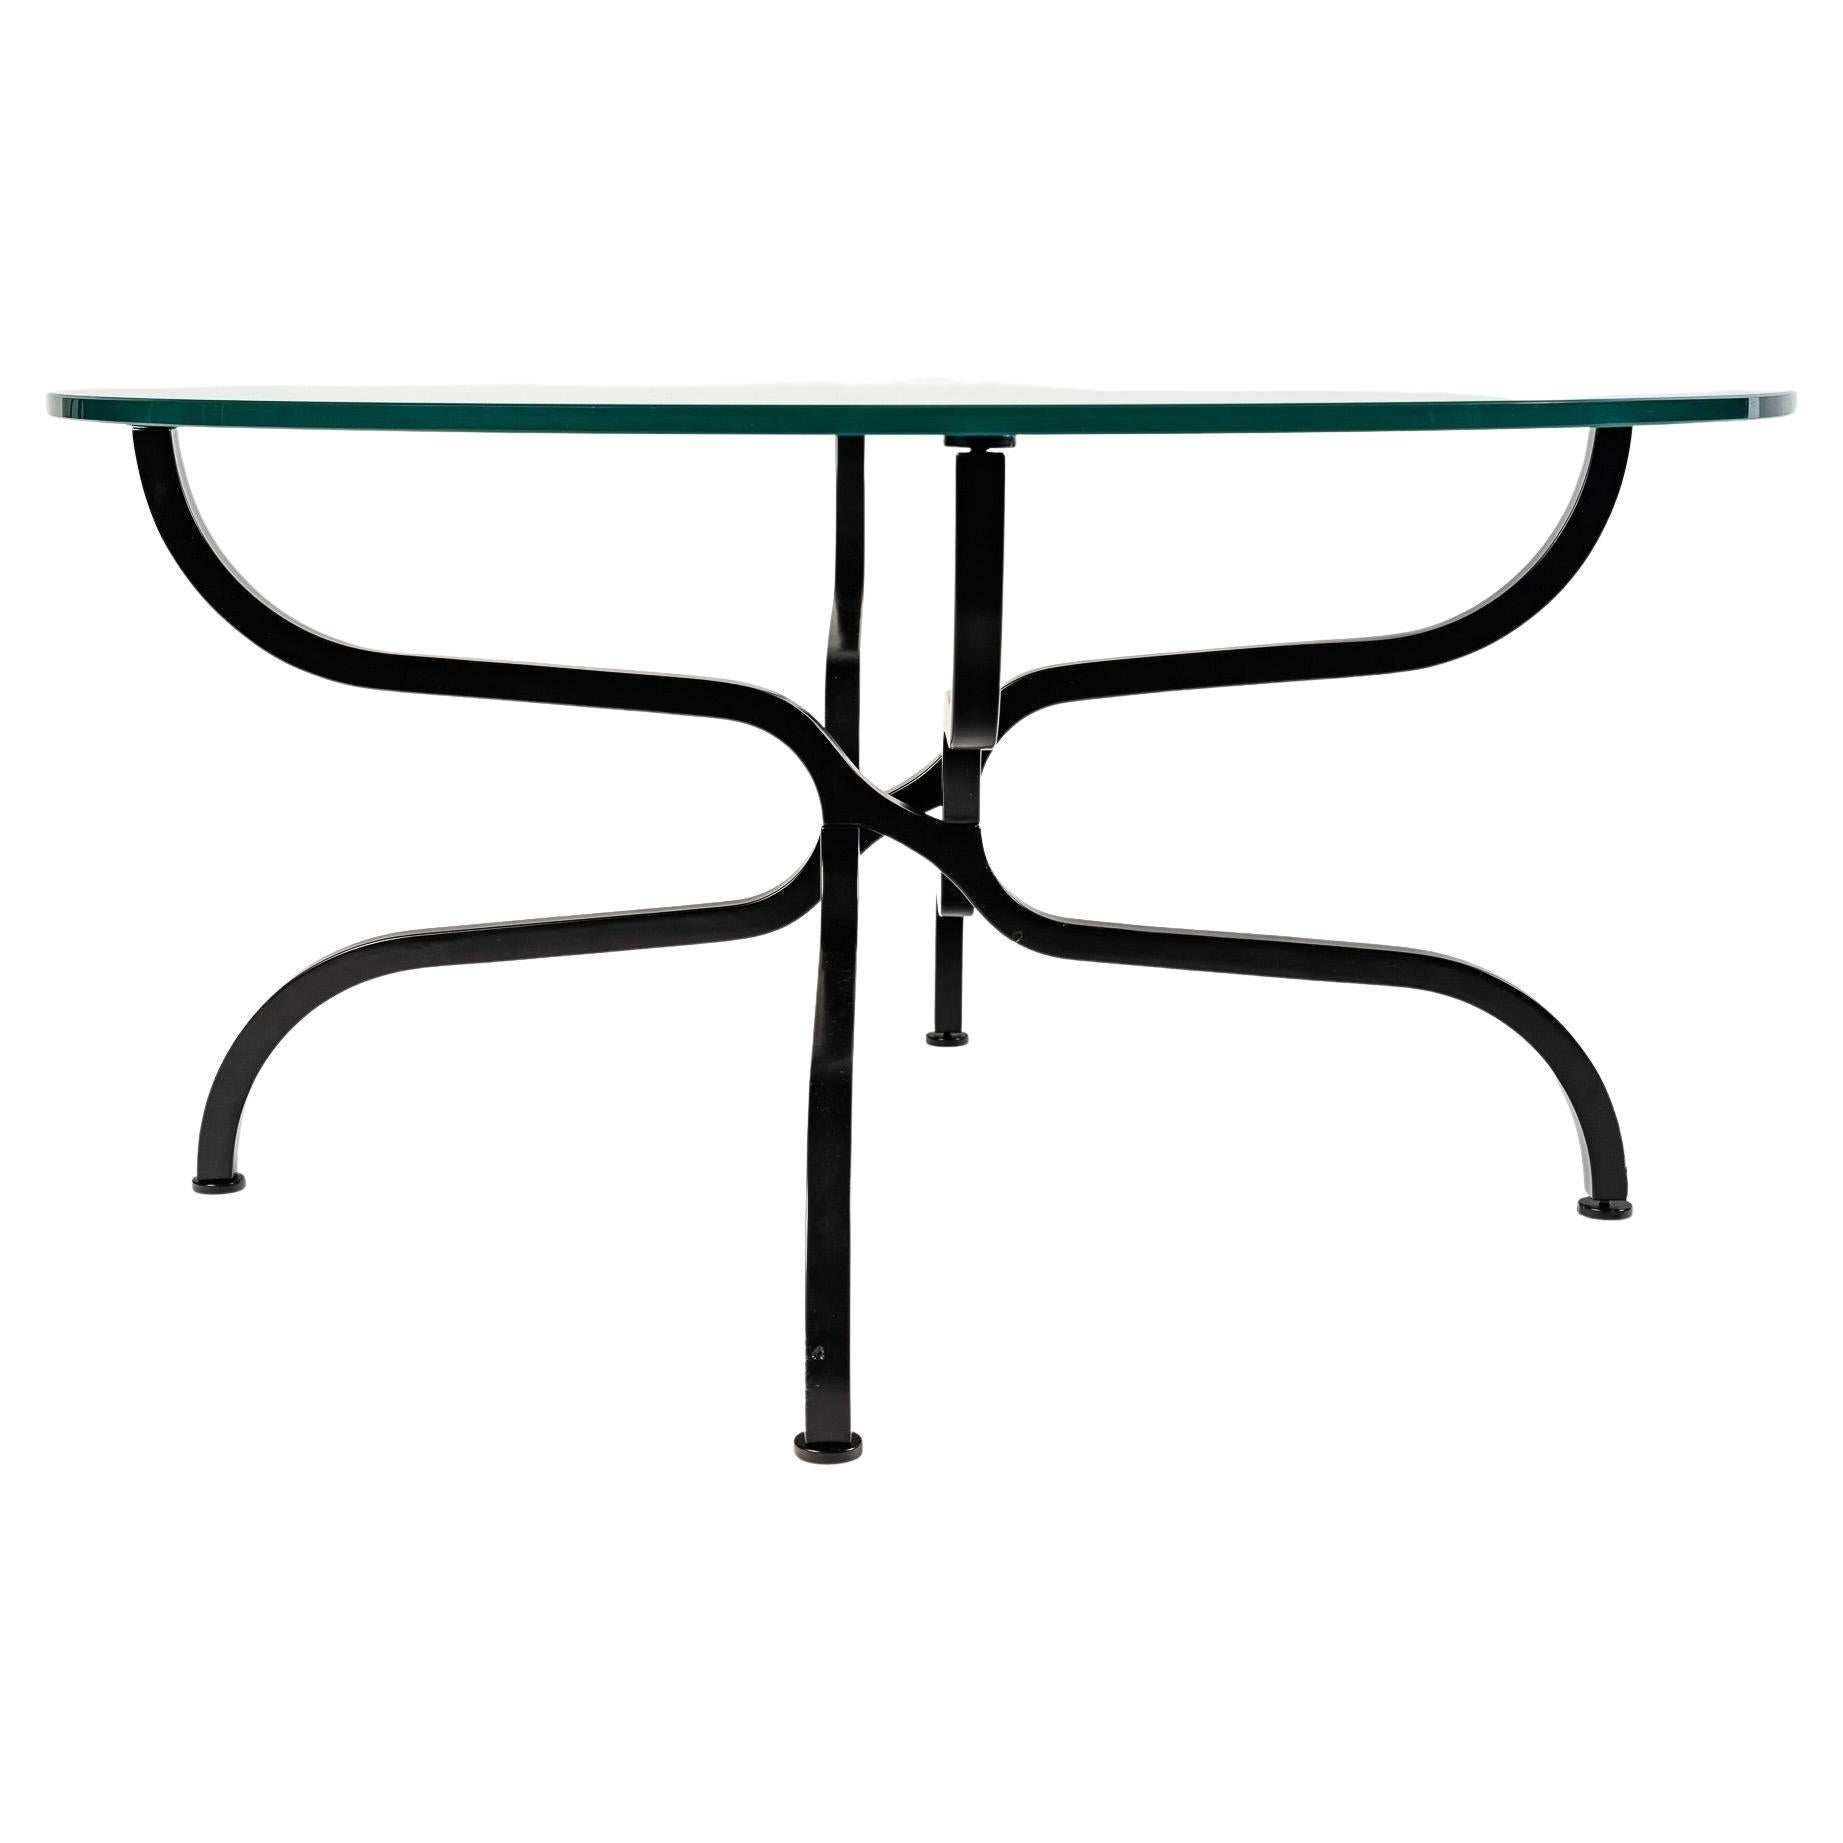 Coffee table 1960 by Georges Geffroy

Composed of a satin black lacquered metal base with a square section formed by four flared legs resting on the floor and then forming very ingenious and beautiful volutes intertwining on the first third under